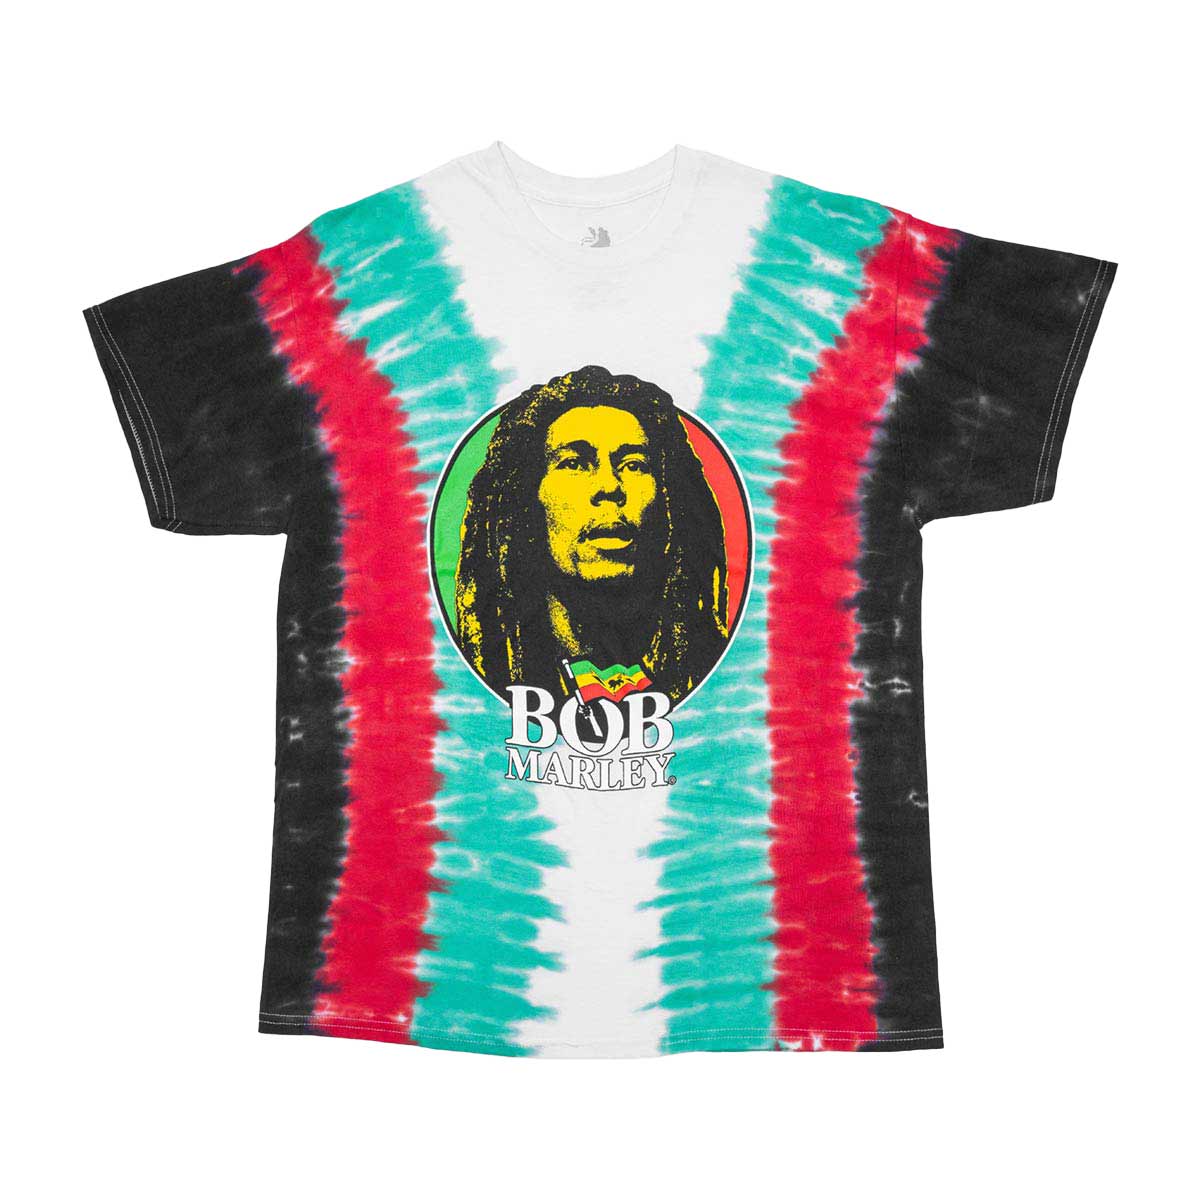 Bob Marley Adult Fit Tee with Tie Dye Design White image number 6